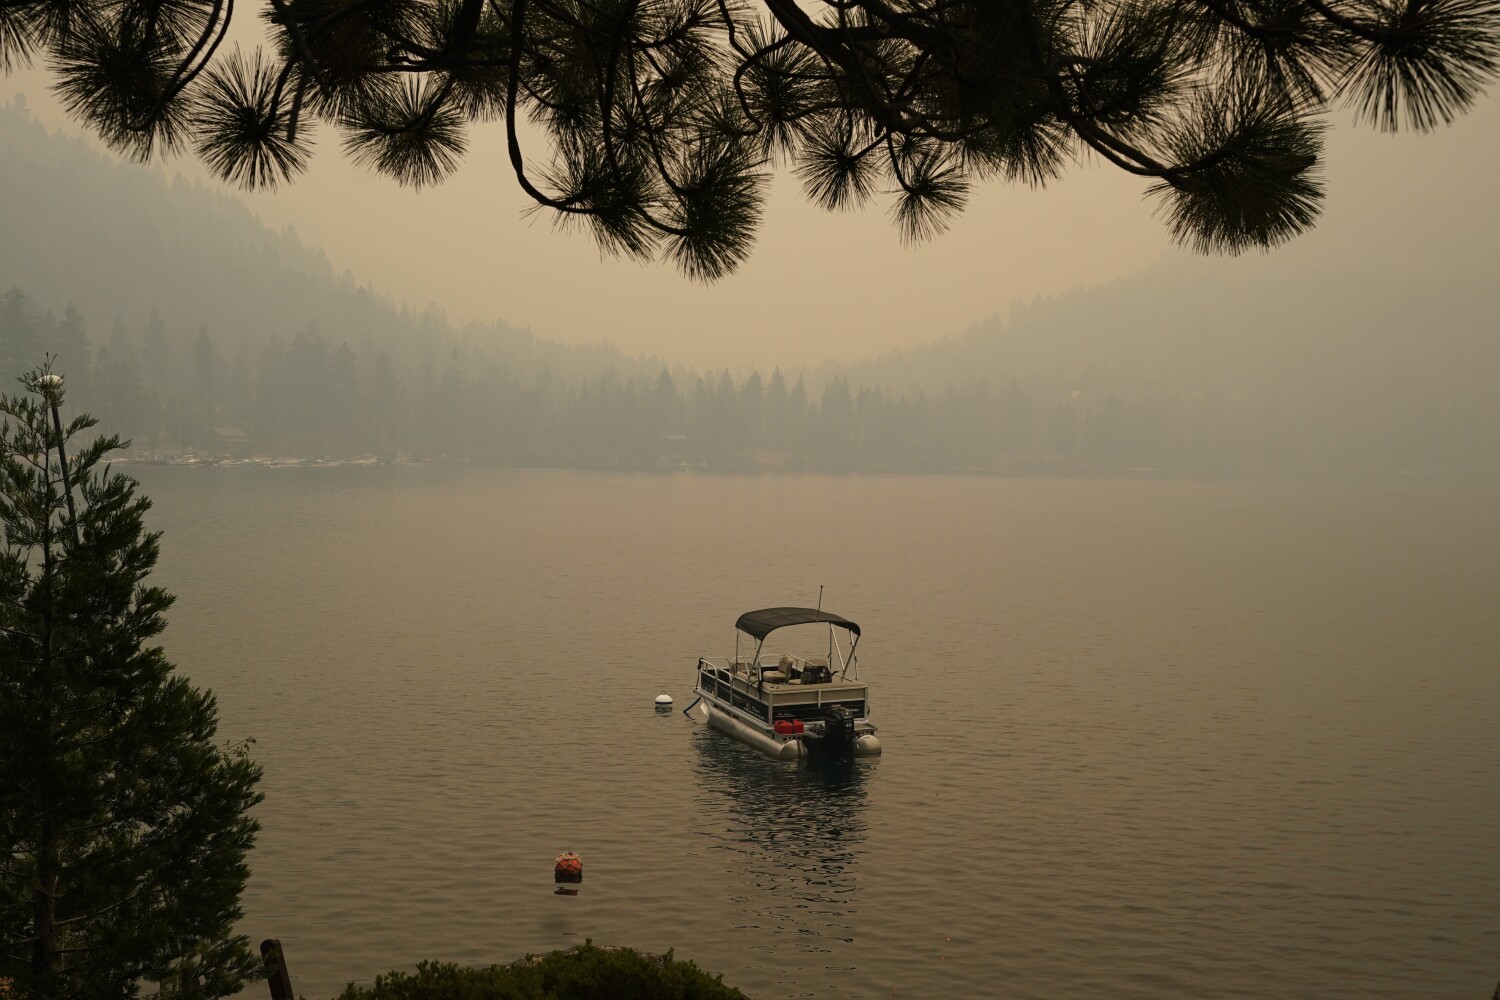 Caldor fire approaches Lake Tahoe: 'Concerned is an understatement'